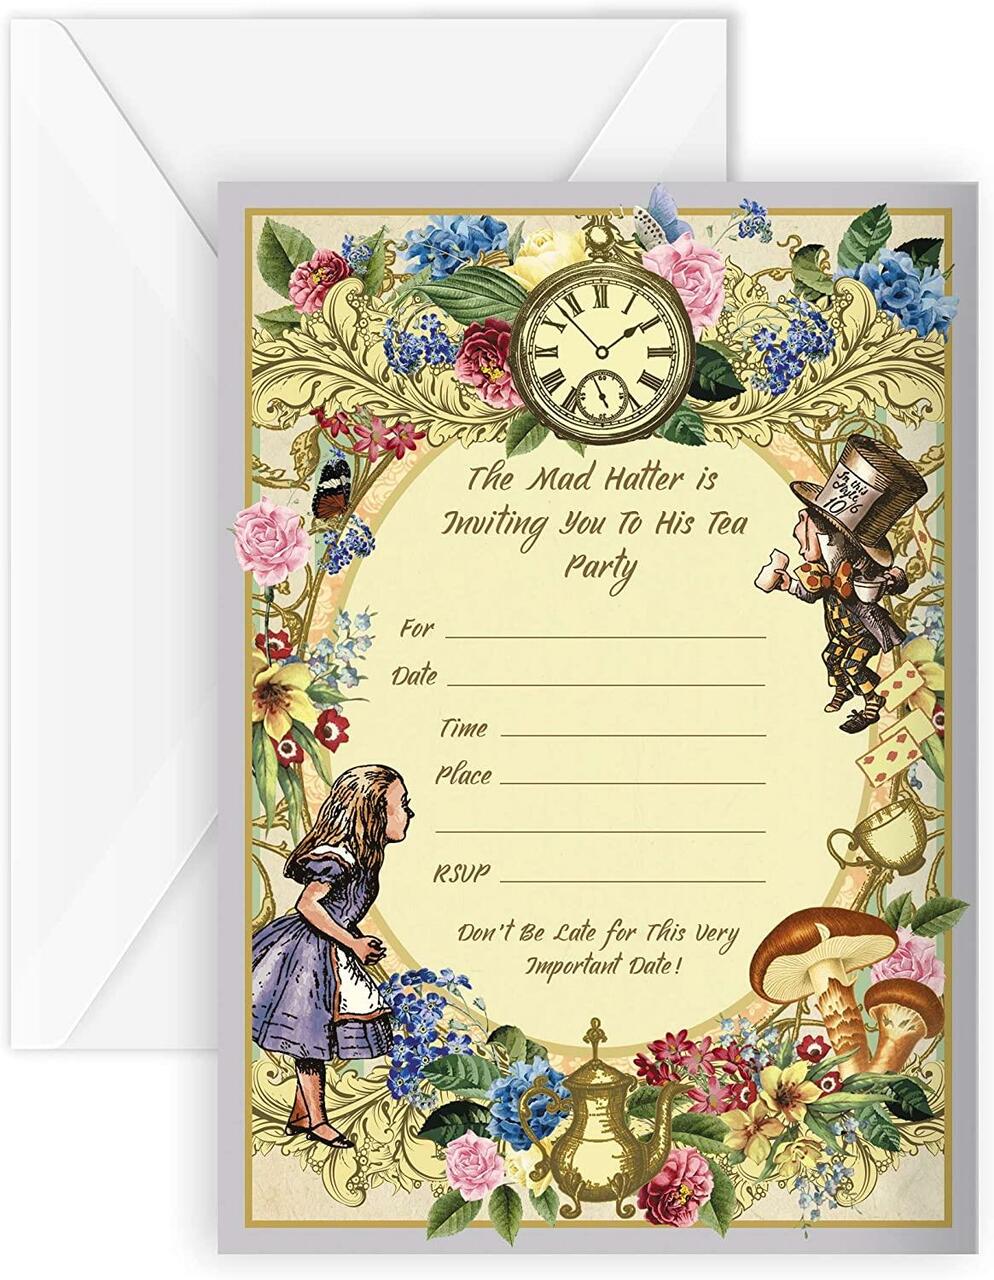 Alice in Wonderland Party Invites Pack of 20 Includes 20 Envelopes Party Supplies Made Hatter Tea Party